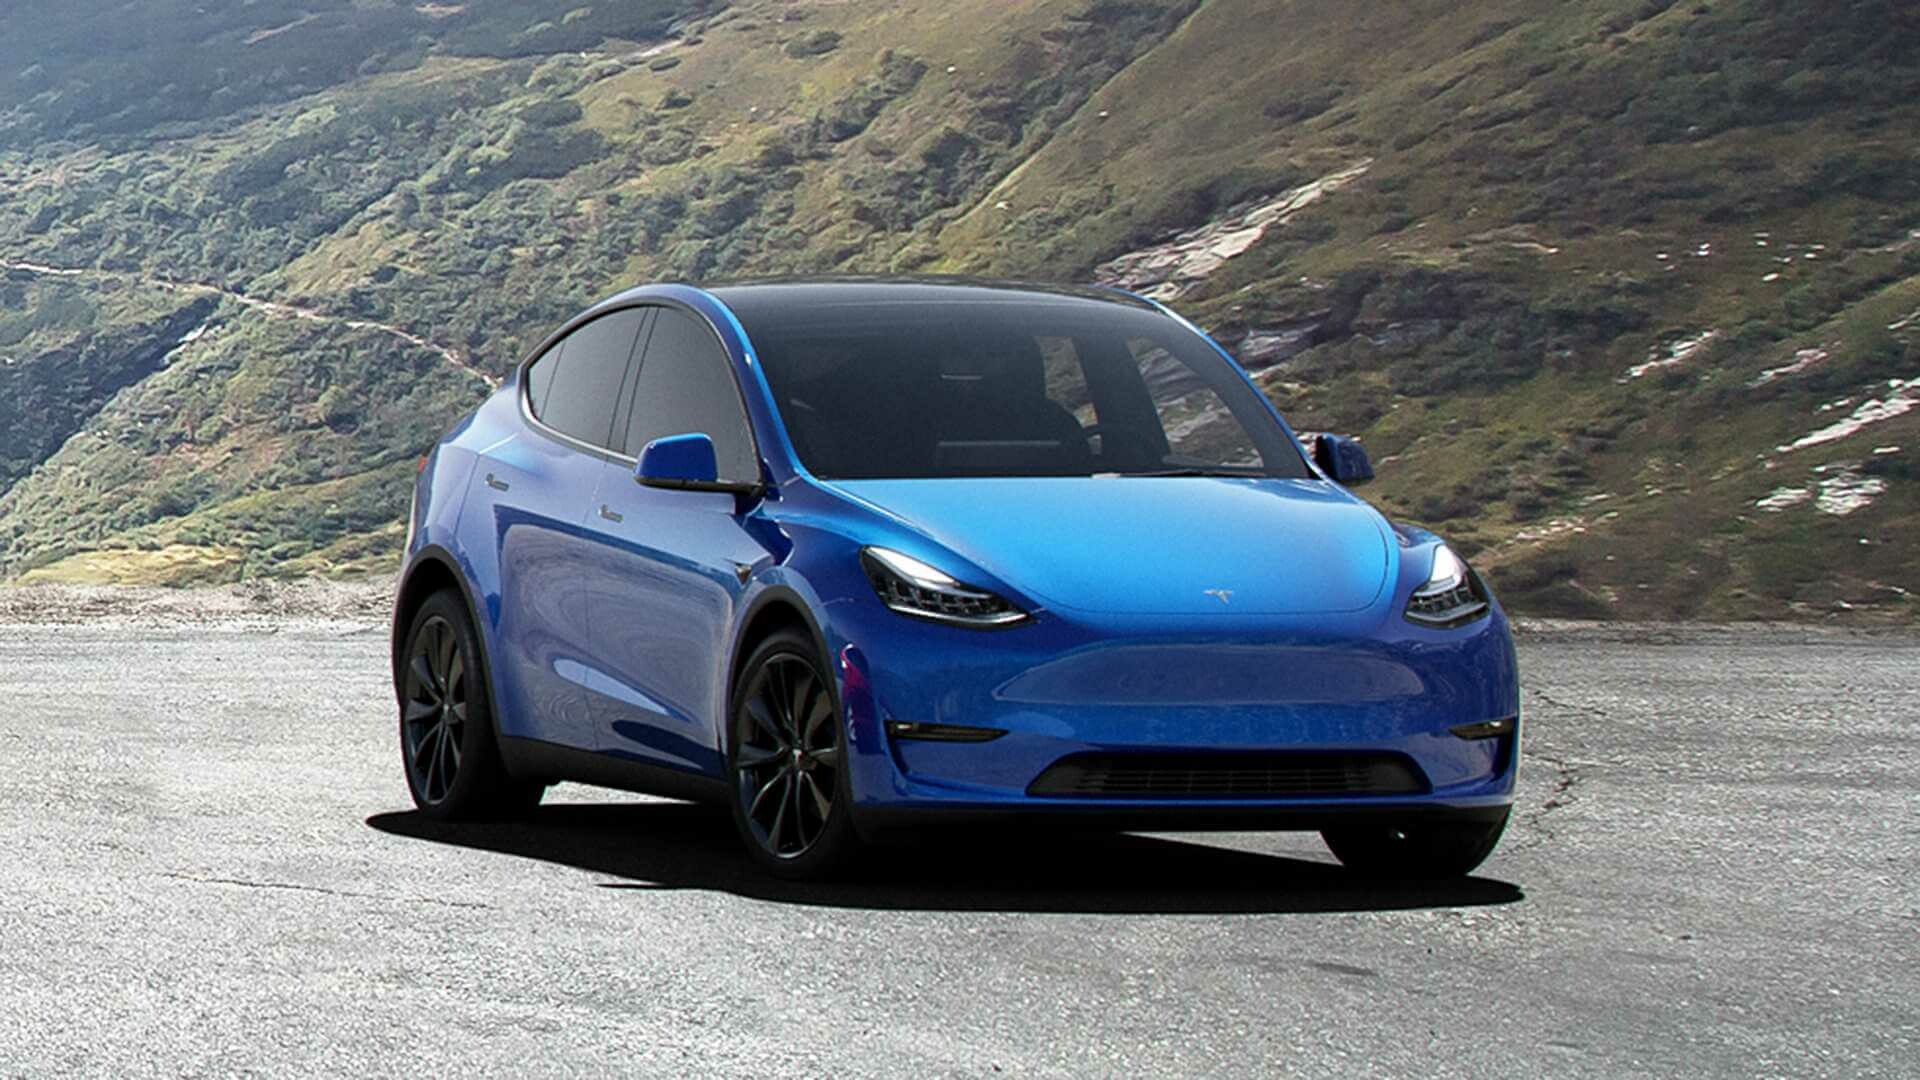 Tesla Model Y: The company offers two basic configurations: Long Range AWD and Performance. 1920x1080 Full HD Wallpaper.